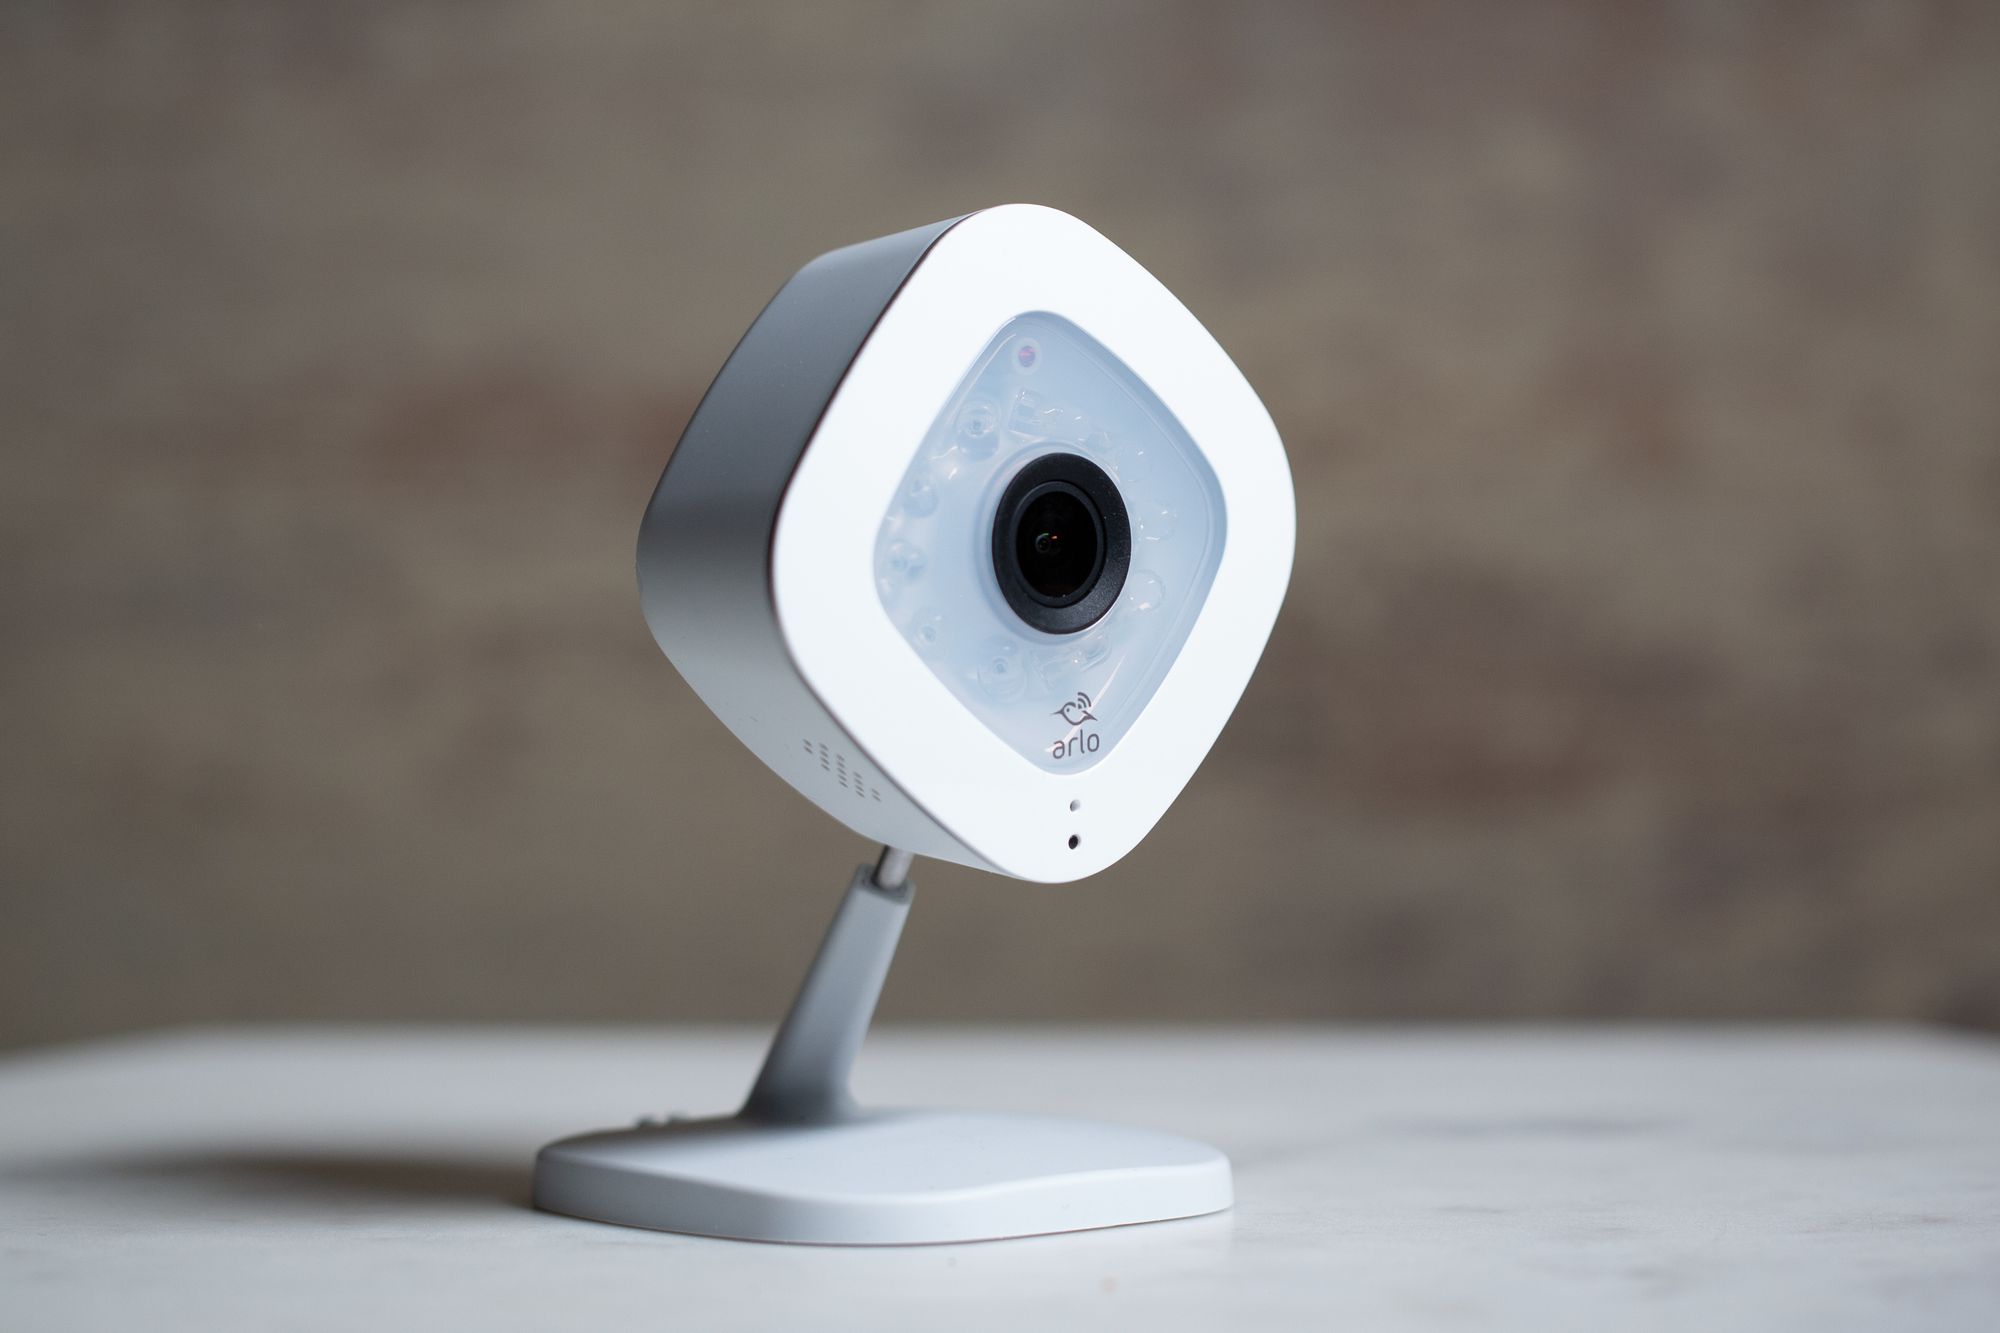 glory passenger The Arlo is taking away security camera features you paid for - The Verge